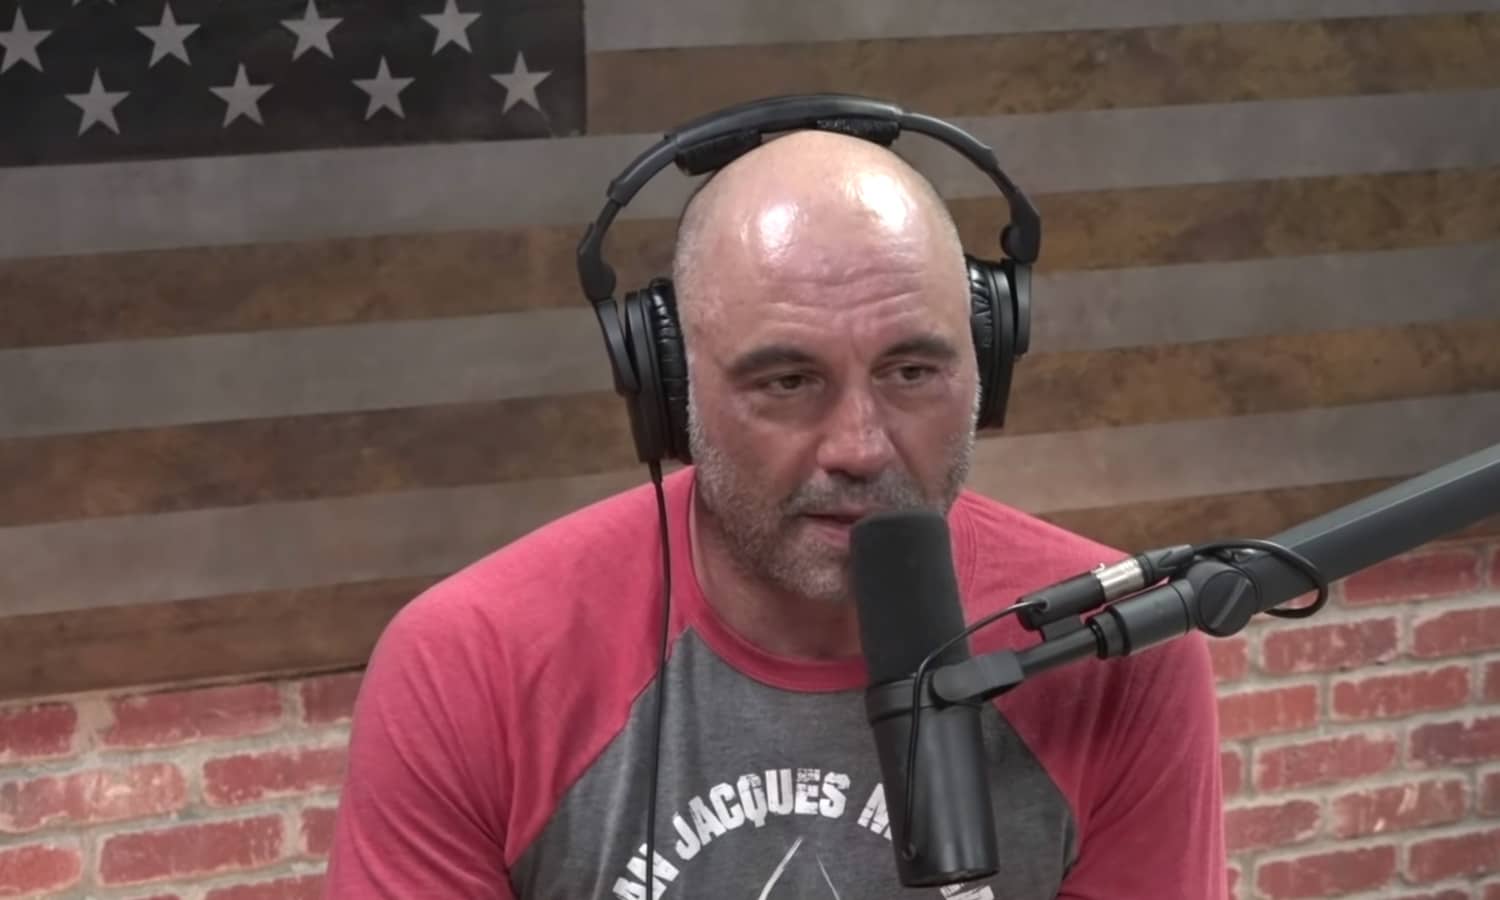 WATCH: This Is The One Thing Comedian Joe Rogan Won't Do High